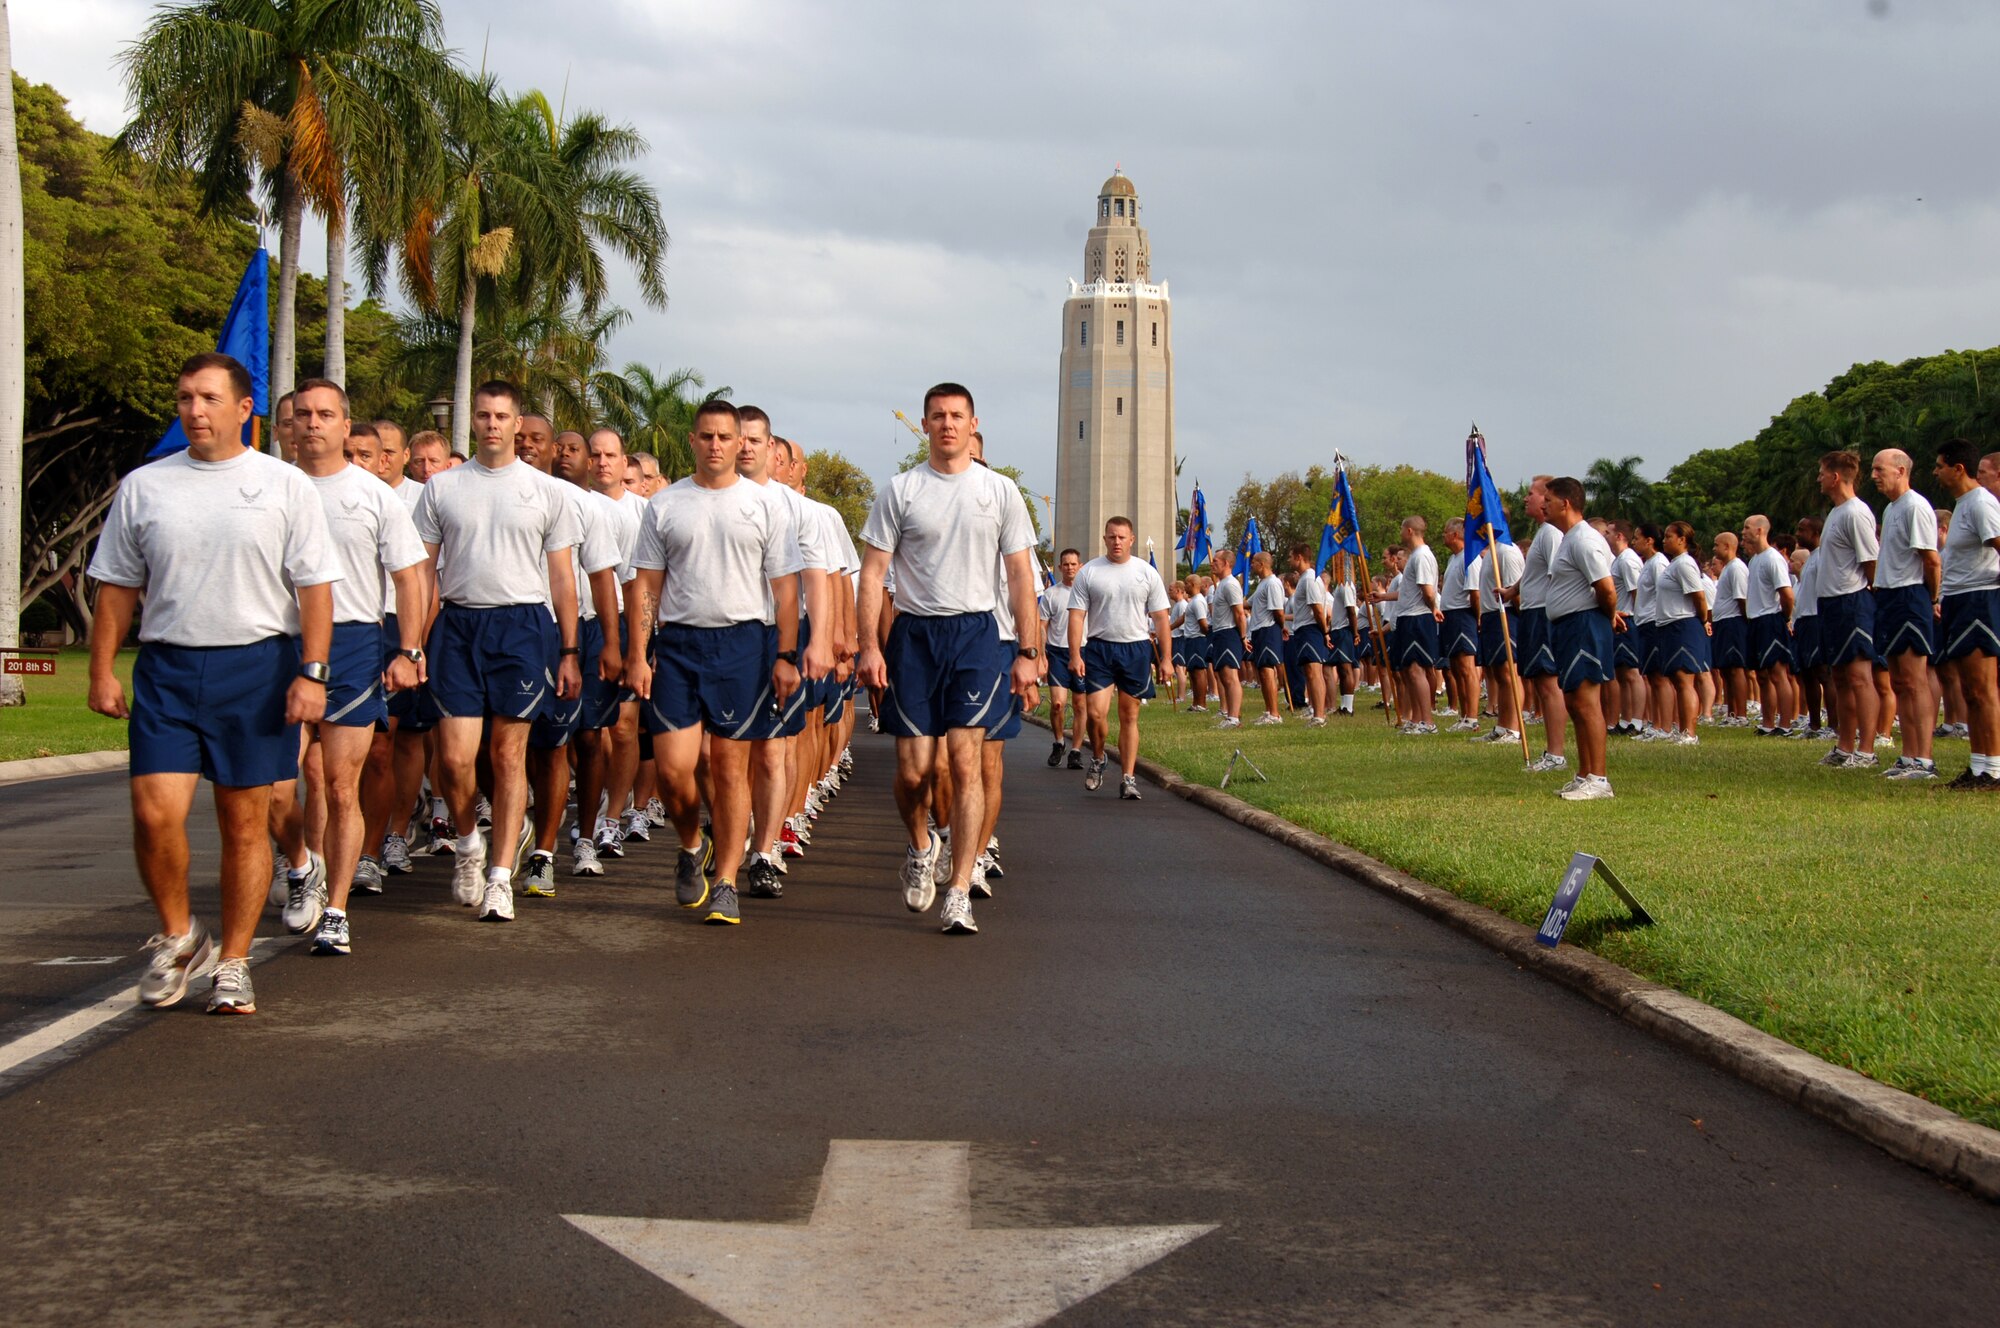 Members of Pacific Air Forces lead the formation at the "Warrior Run" May 7 at Joint Base Pearl Harbor Hickam, Hi. Participants were addressed by Col. Giovanni Tuck, 15th Airlift Wing Commander before beginning the run - Col. Tuck's last as 15th AW commander. (U.S. Air Force photo by Senior Airman Nathan Allen)